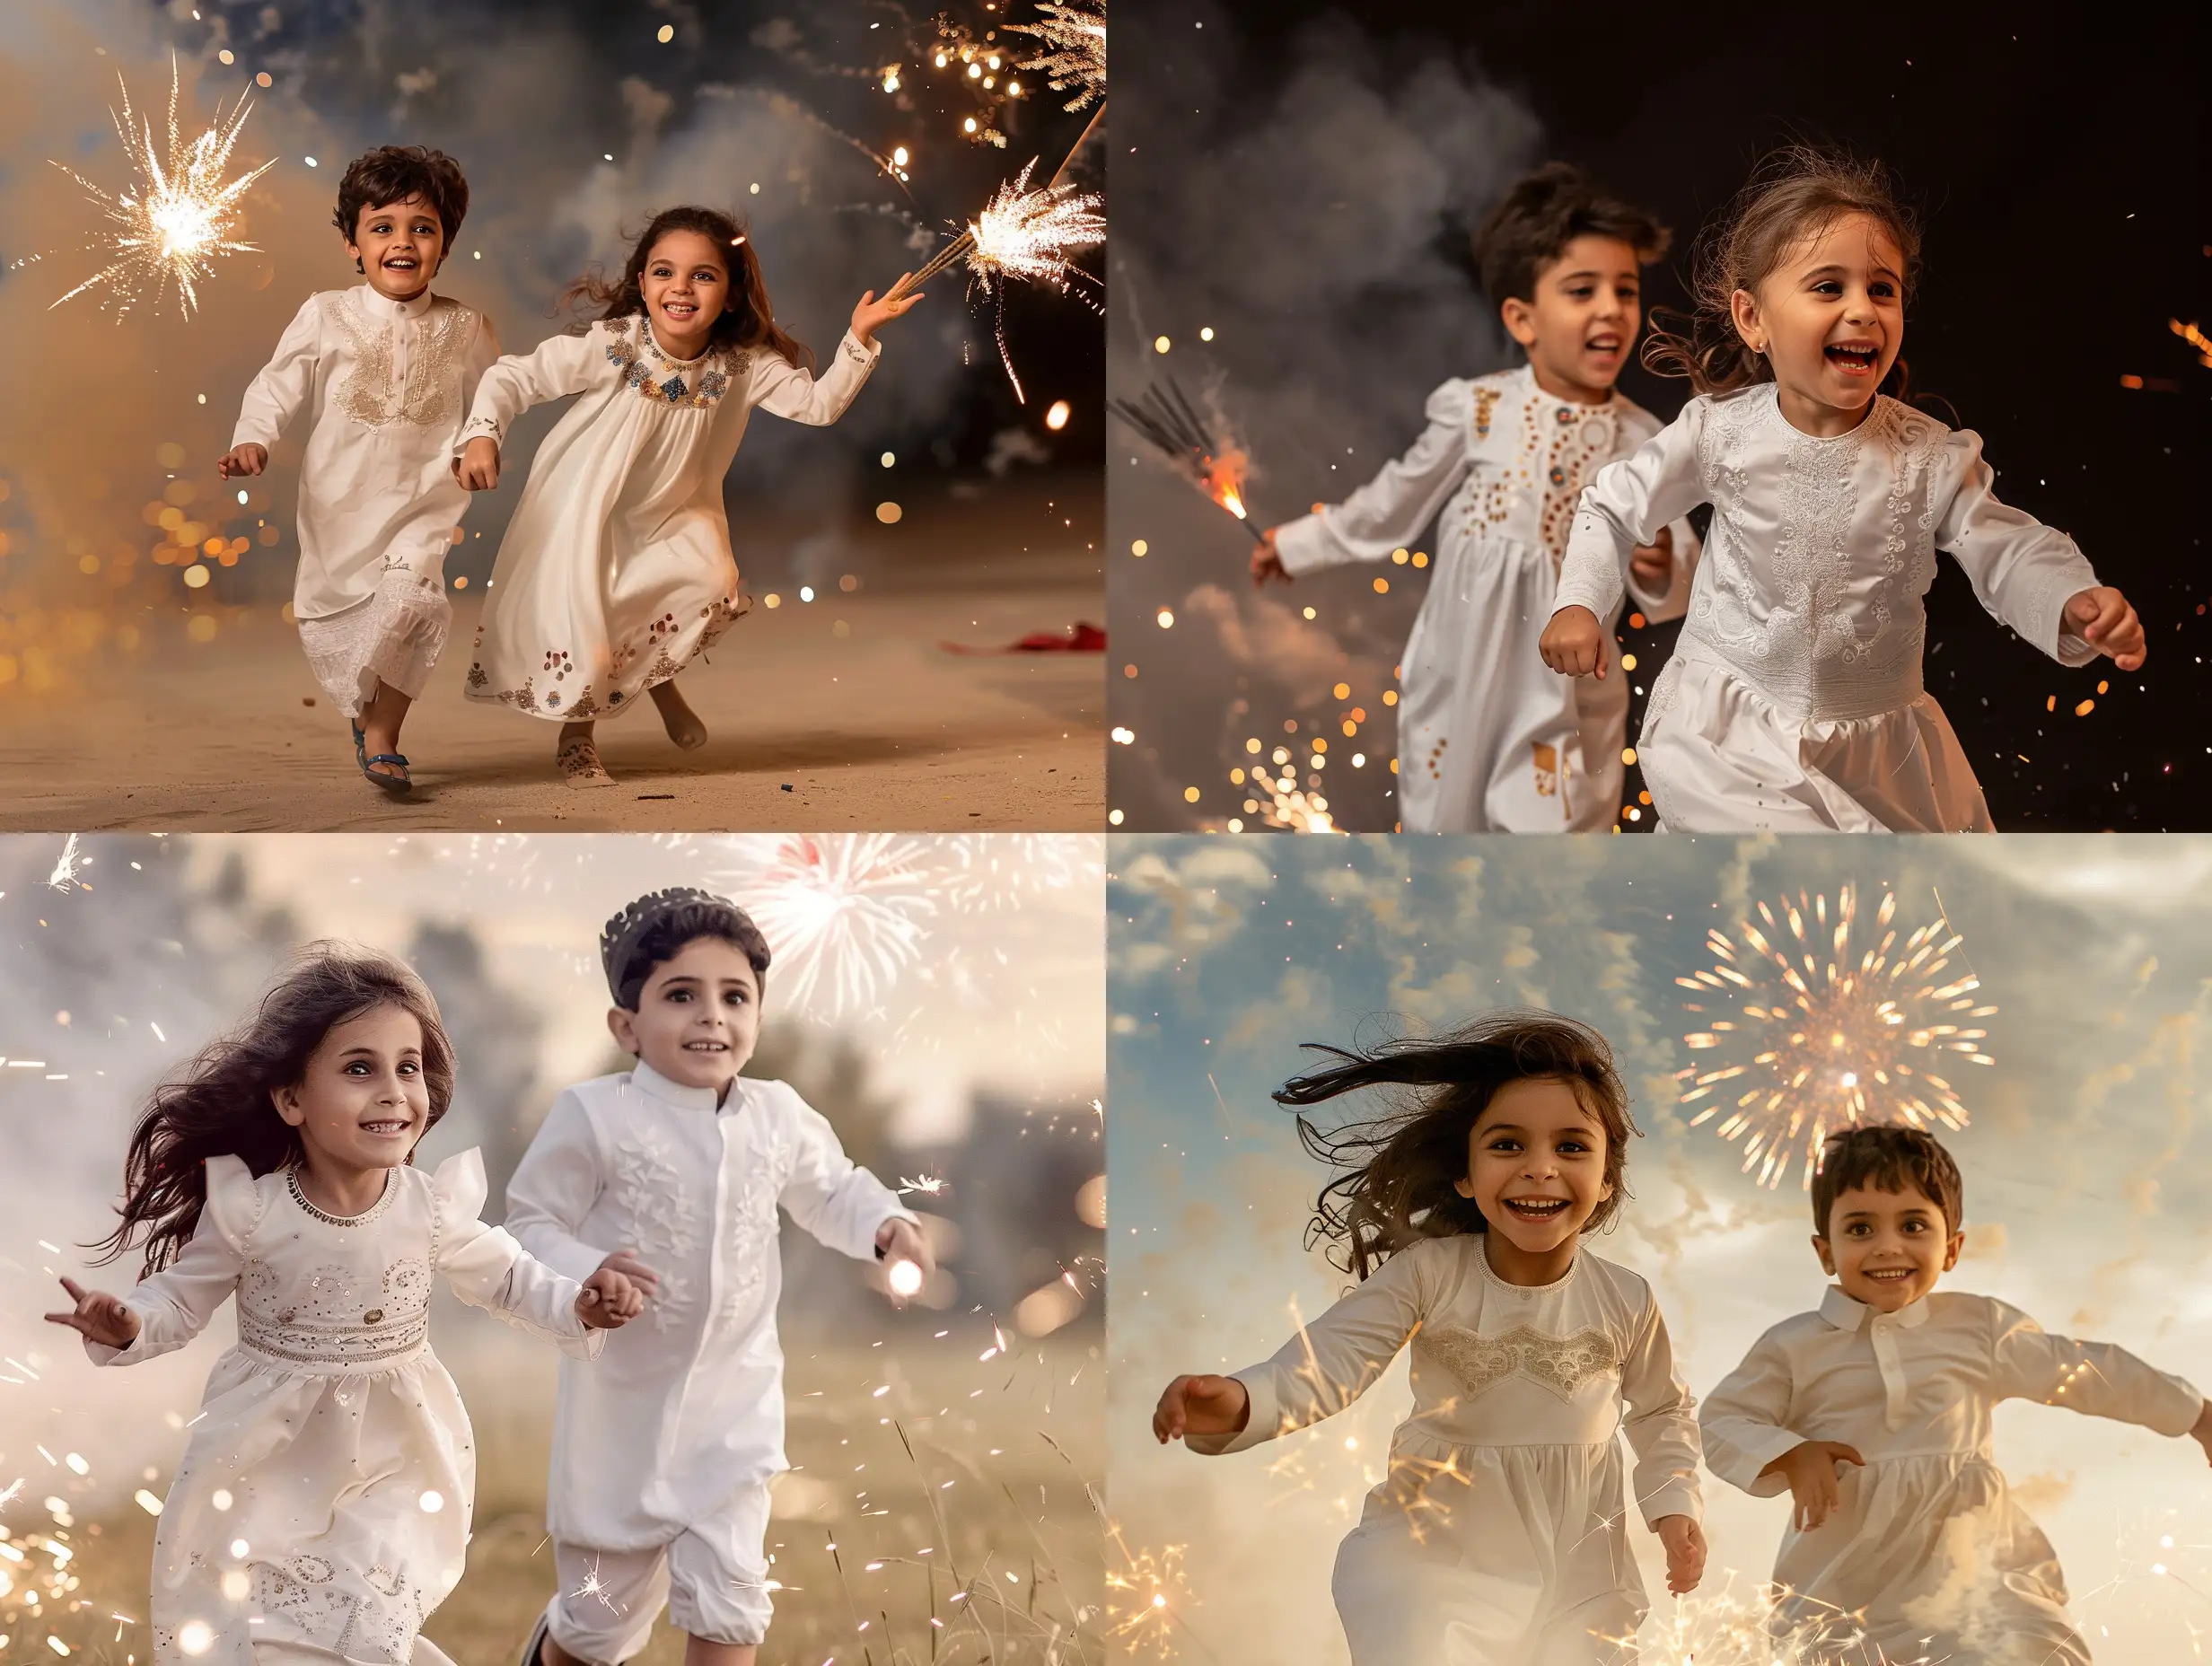 Children in white Eid dresses, running happily with fireworks in the sky, signs of Eid al-Fitr.
Professional portrait photography, HD digital camera, contemporary era, warm color palette., Portrait, Realism, Keyshot, Normal perspective, Mirrorless Camera, Natural Light, Delight,